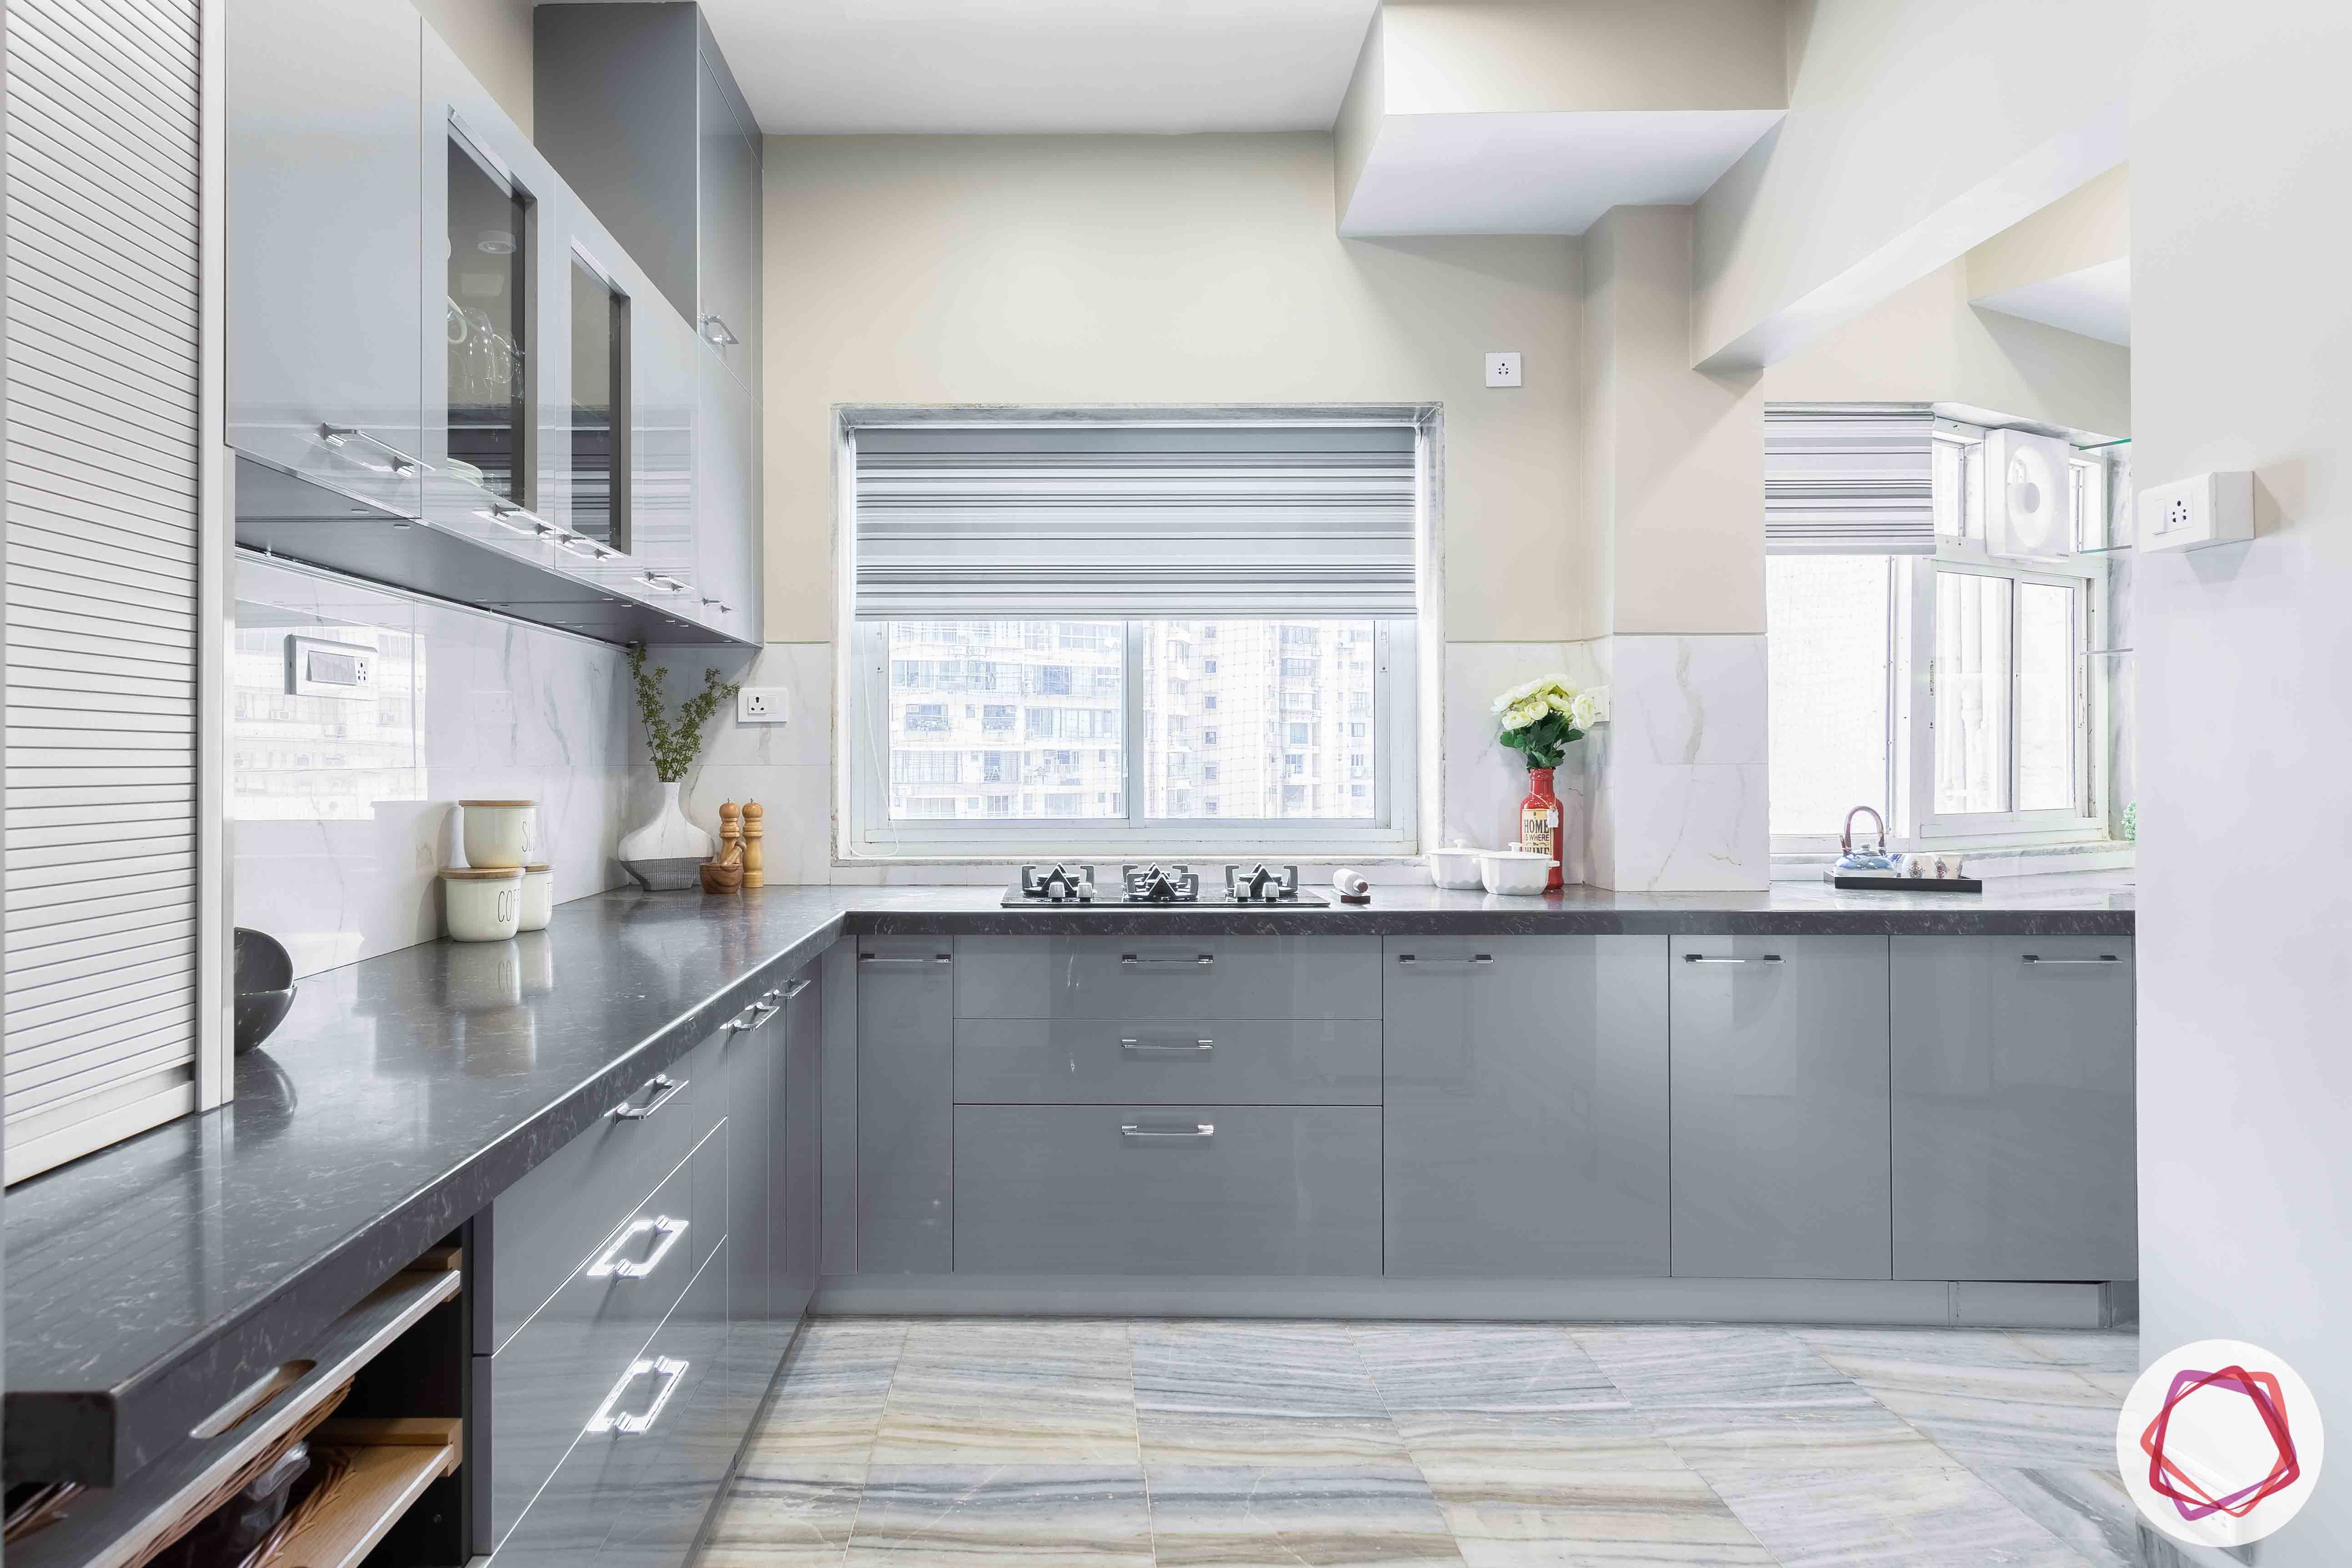 kitchen-base-grey-cabinets-window-counter-flooring-blinds